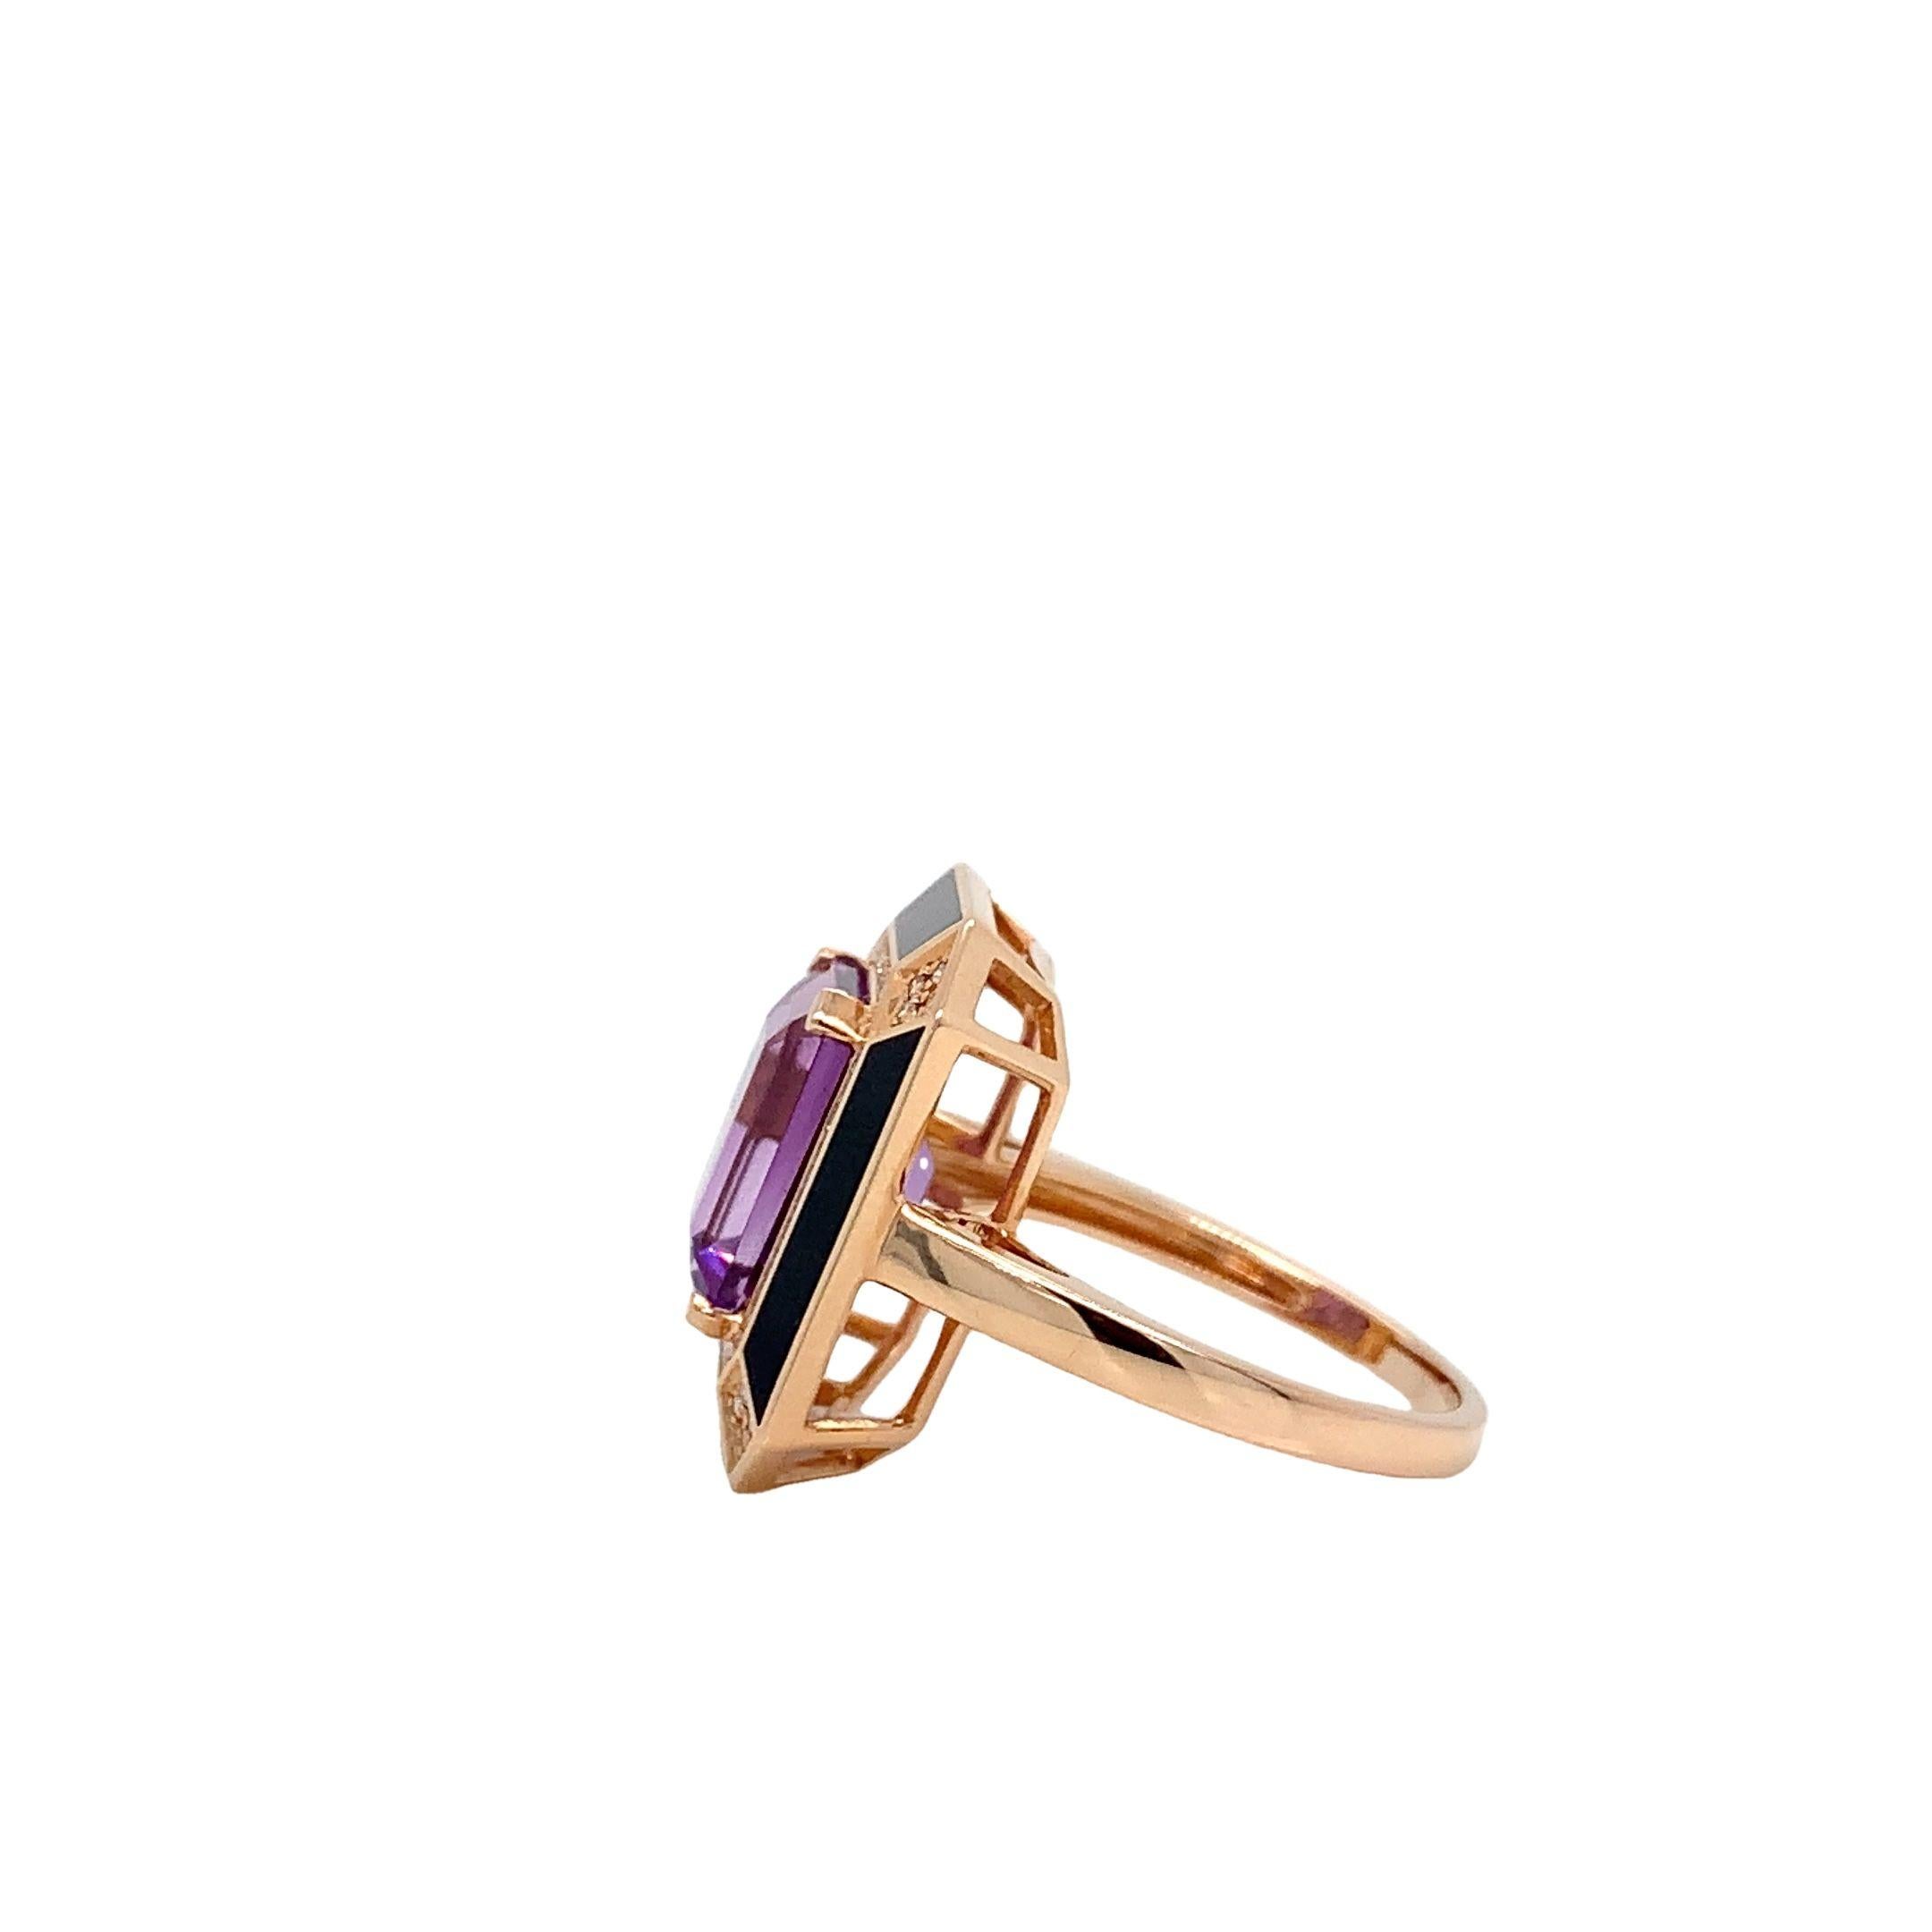 18K Rose Gold
Amethyst - 4.67 Cts
Diamond - 0.14 Cts
All Diamond are G - H/ SI.